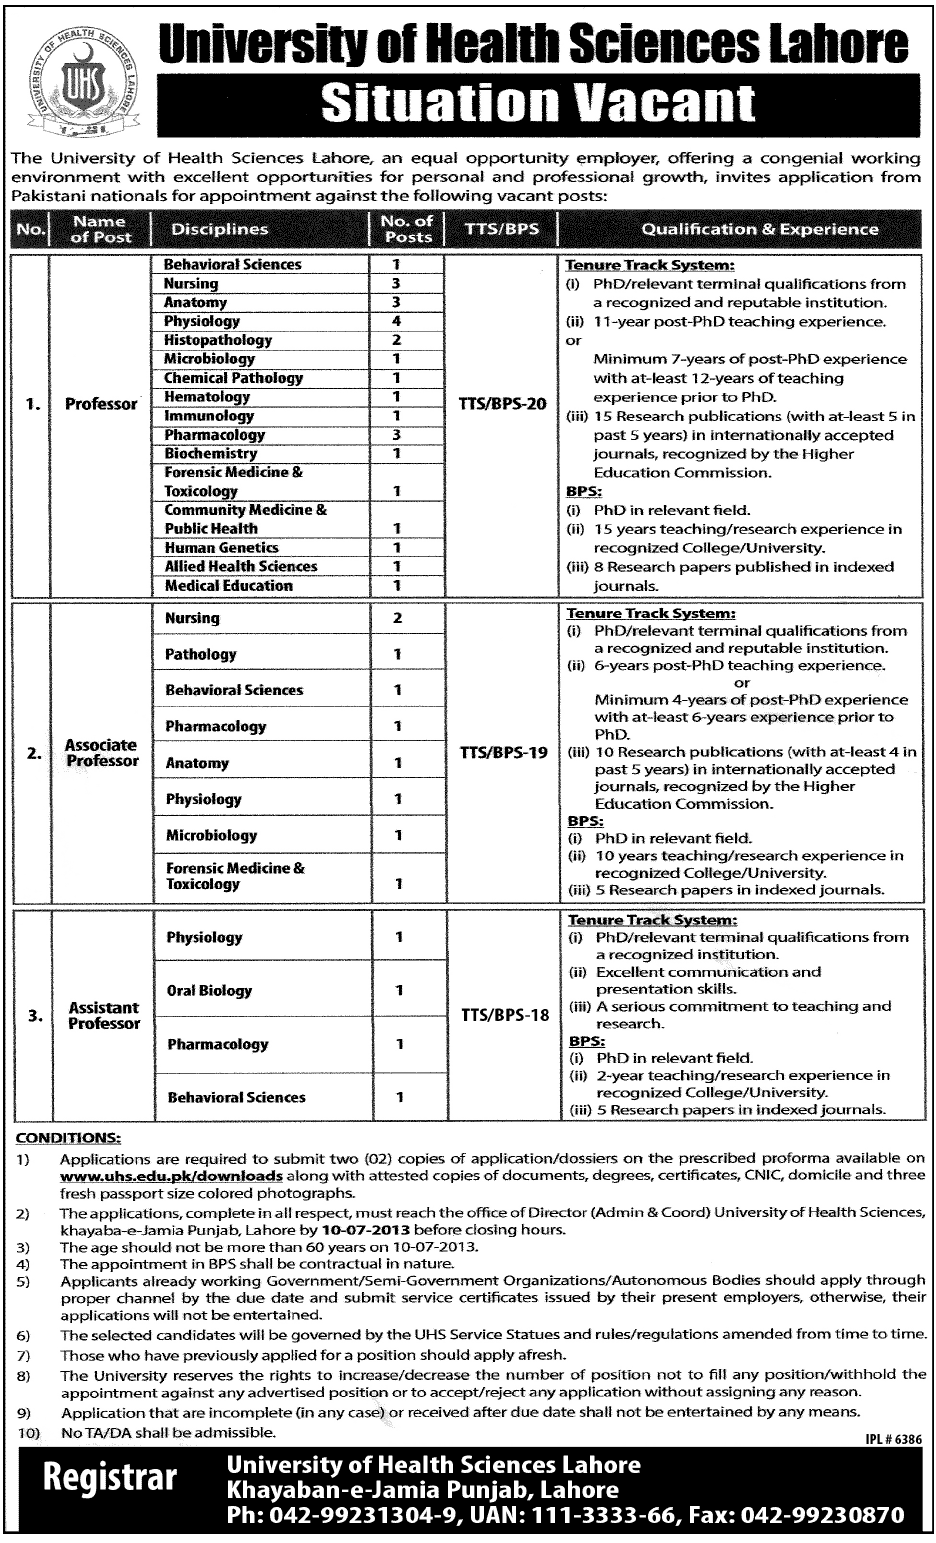 University of Health Sciences Lahore Jobs Required for Professors